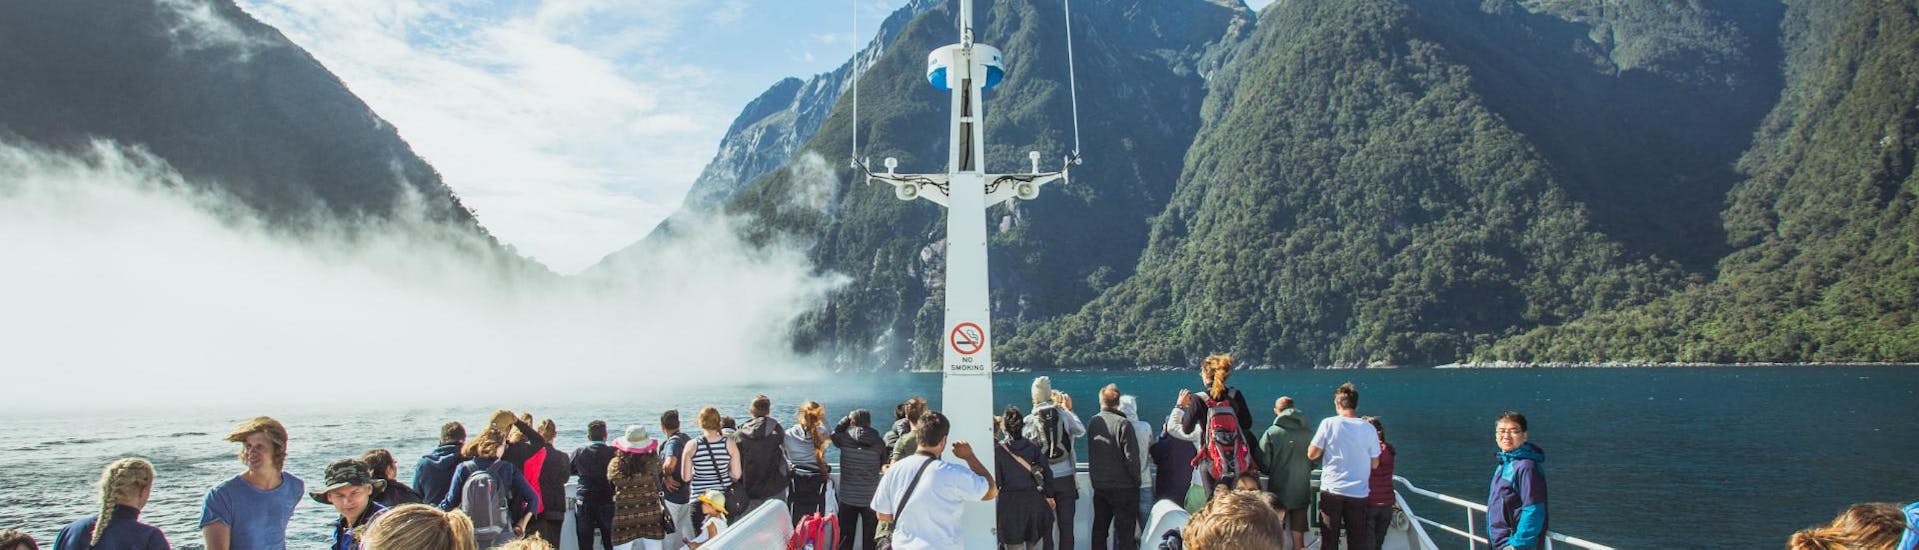 During the Coach Tour with Milford Sound Cruise at Sunrise travellers are gathered at the deck of an luxurious catamaran operated by Jucy Cruise.